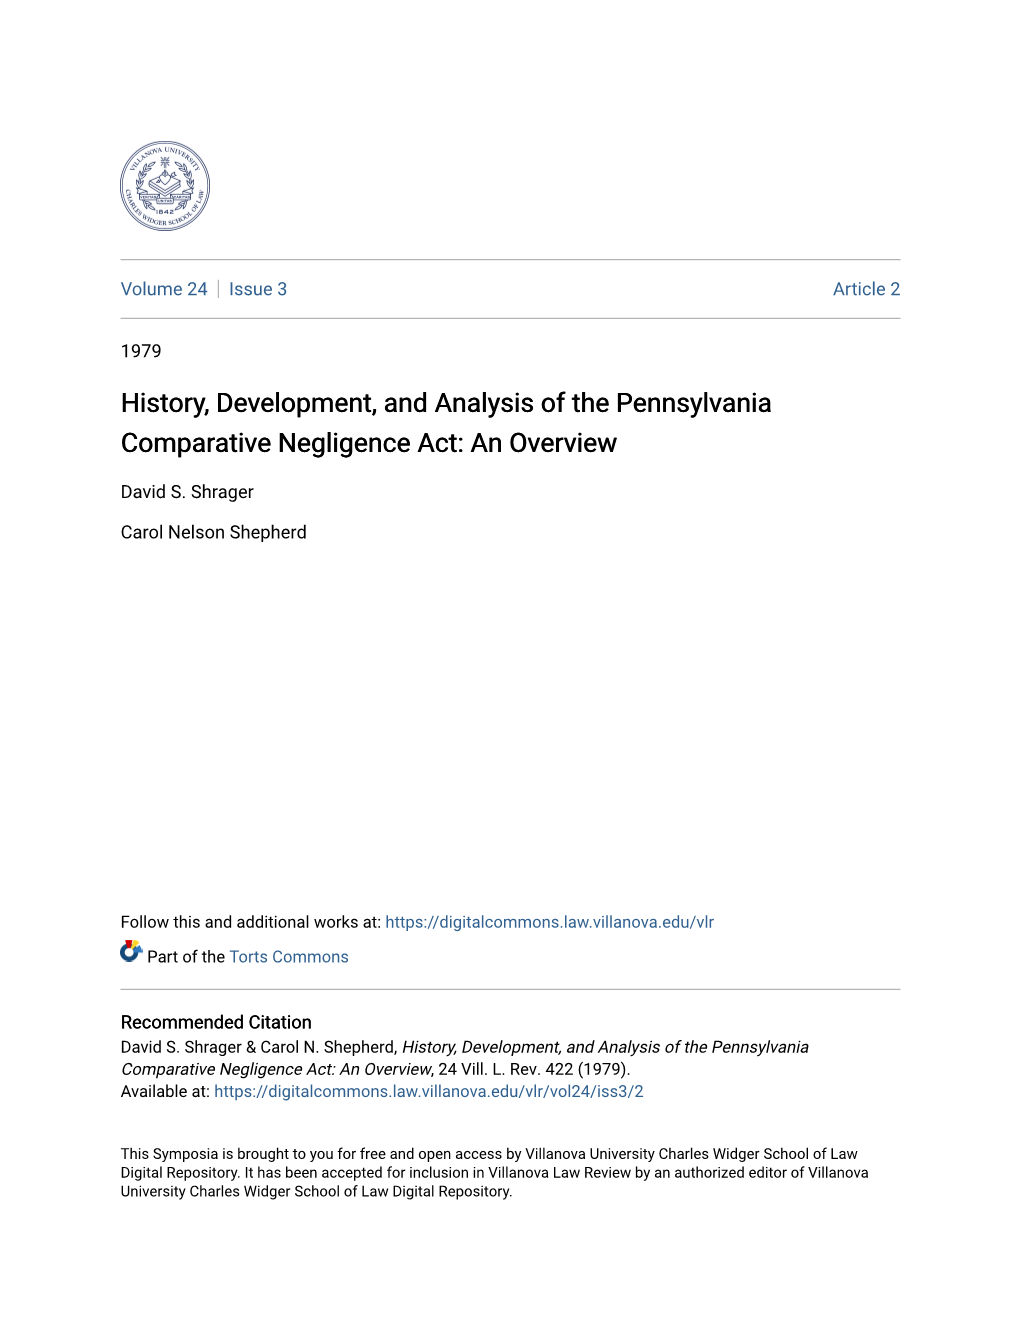 History, Development, and Analysis of the Pennsylvania Comparative Negligence Act: an Overview